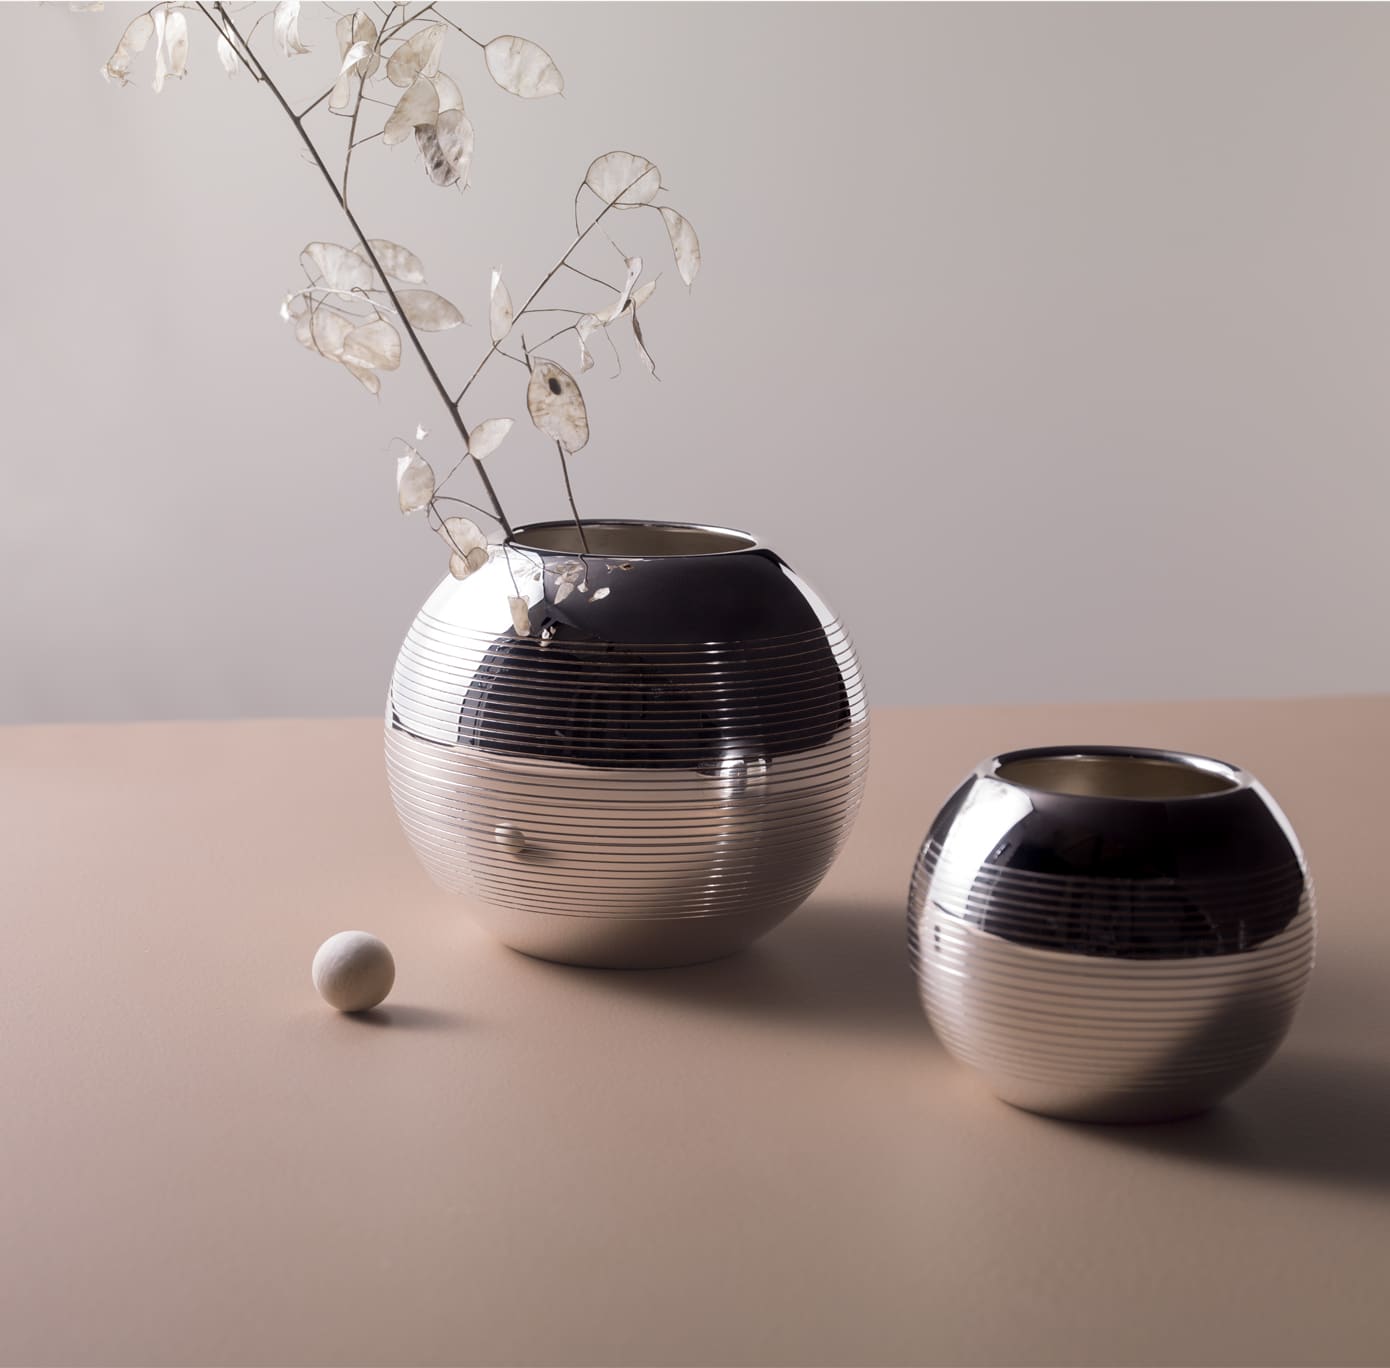 Vases in silver plated from Pétanque collection from Puiforcat photographed on a light pink table in front of a grey wall with a flower in the left vase, and a boule game starter in front